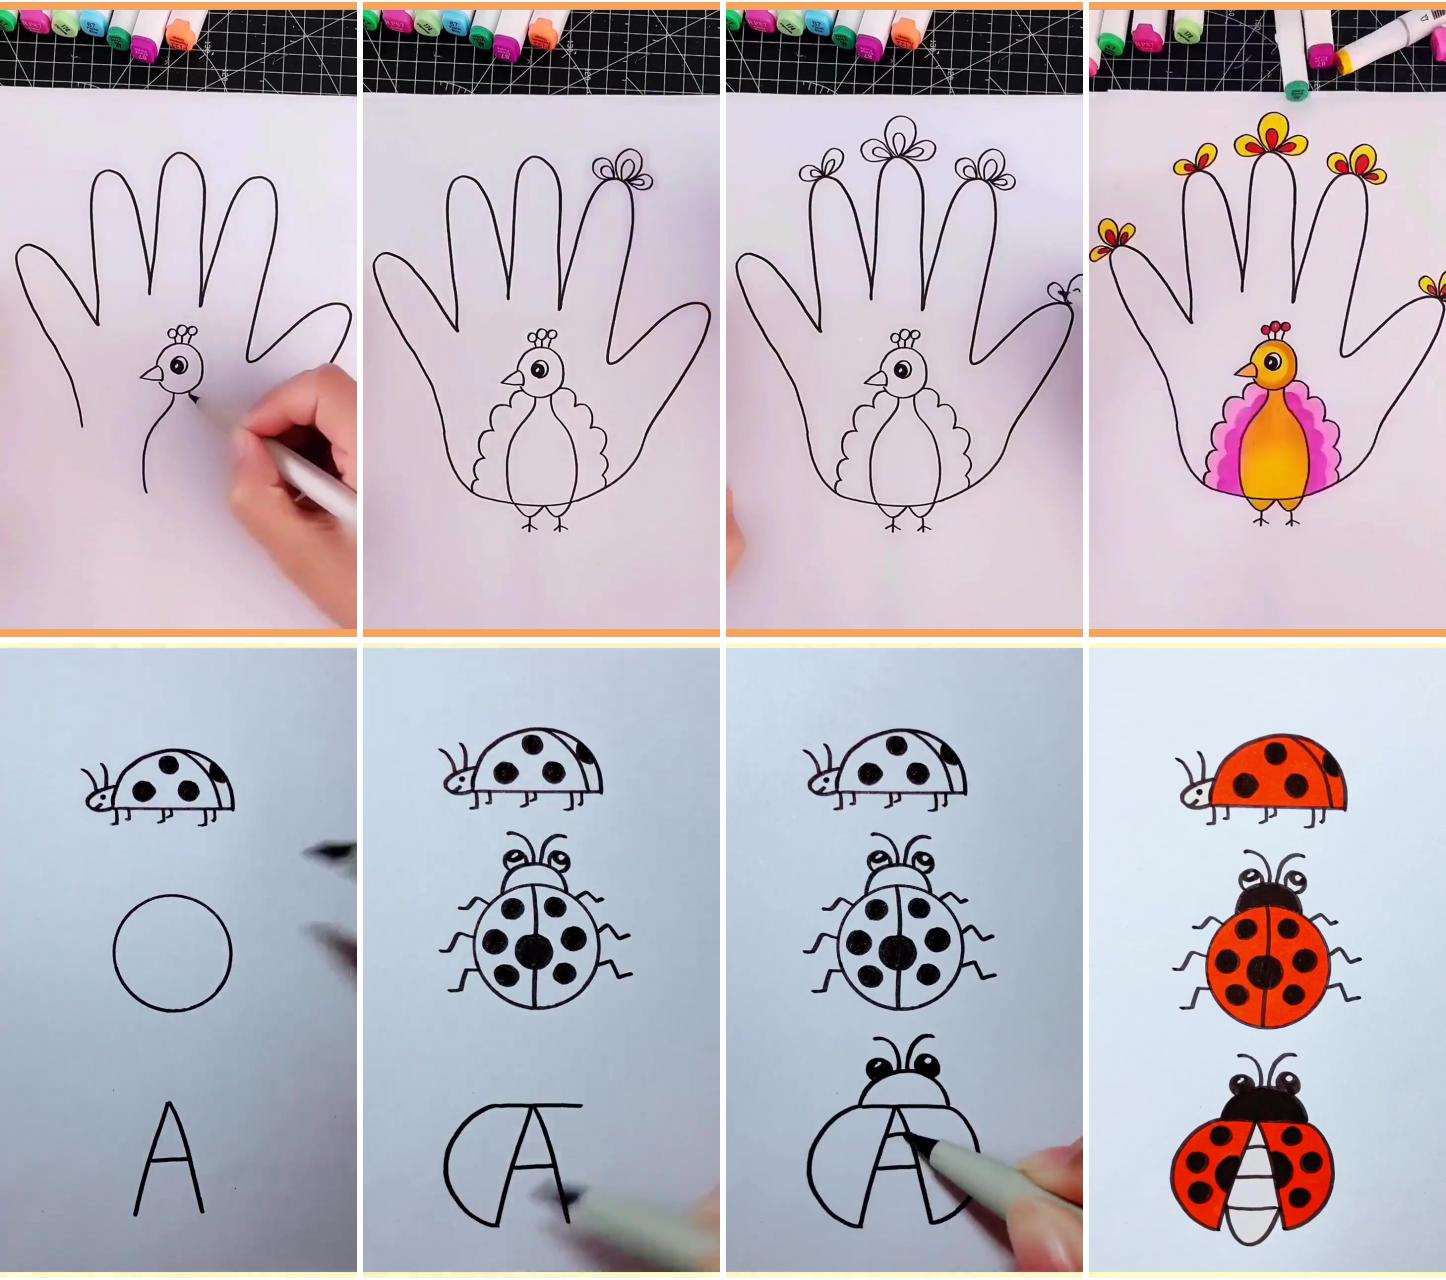 How to draw a peacock - easy ways with pictures and video | how to draw a ladybug step by step ladybug drawing tutorial